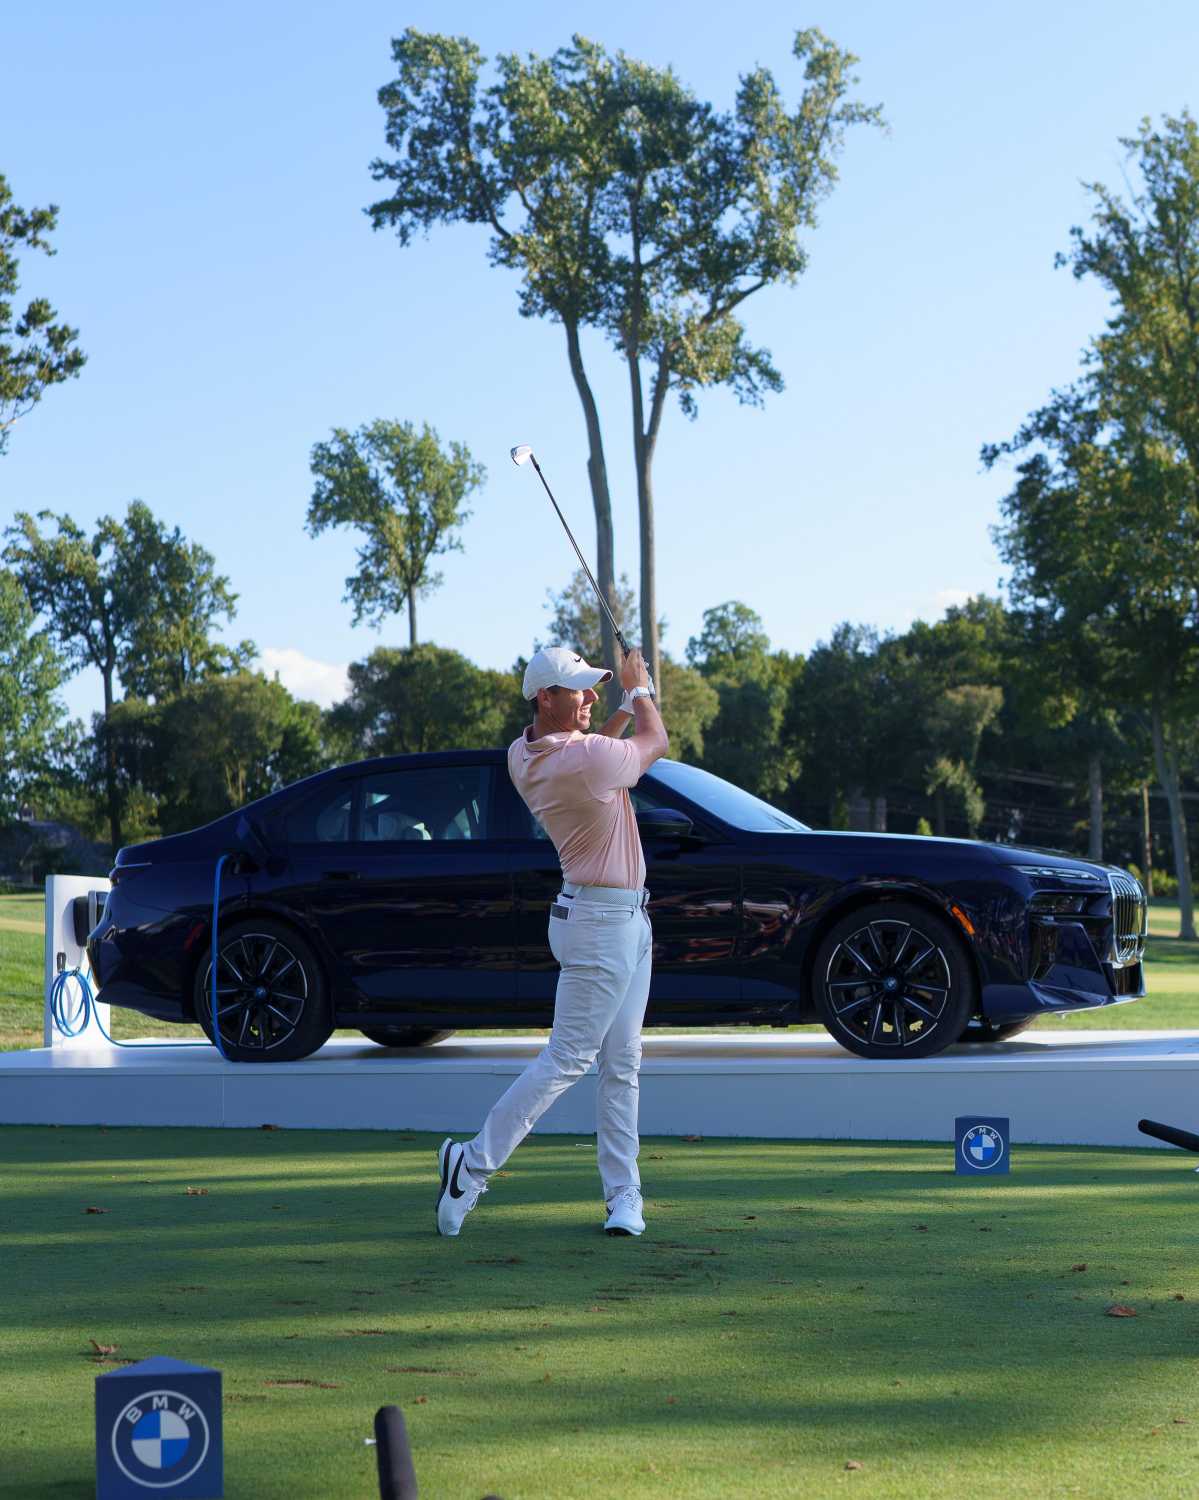 The BMW i7 is the Hole-in-One Prize for the 2022 BMW Championship.